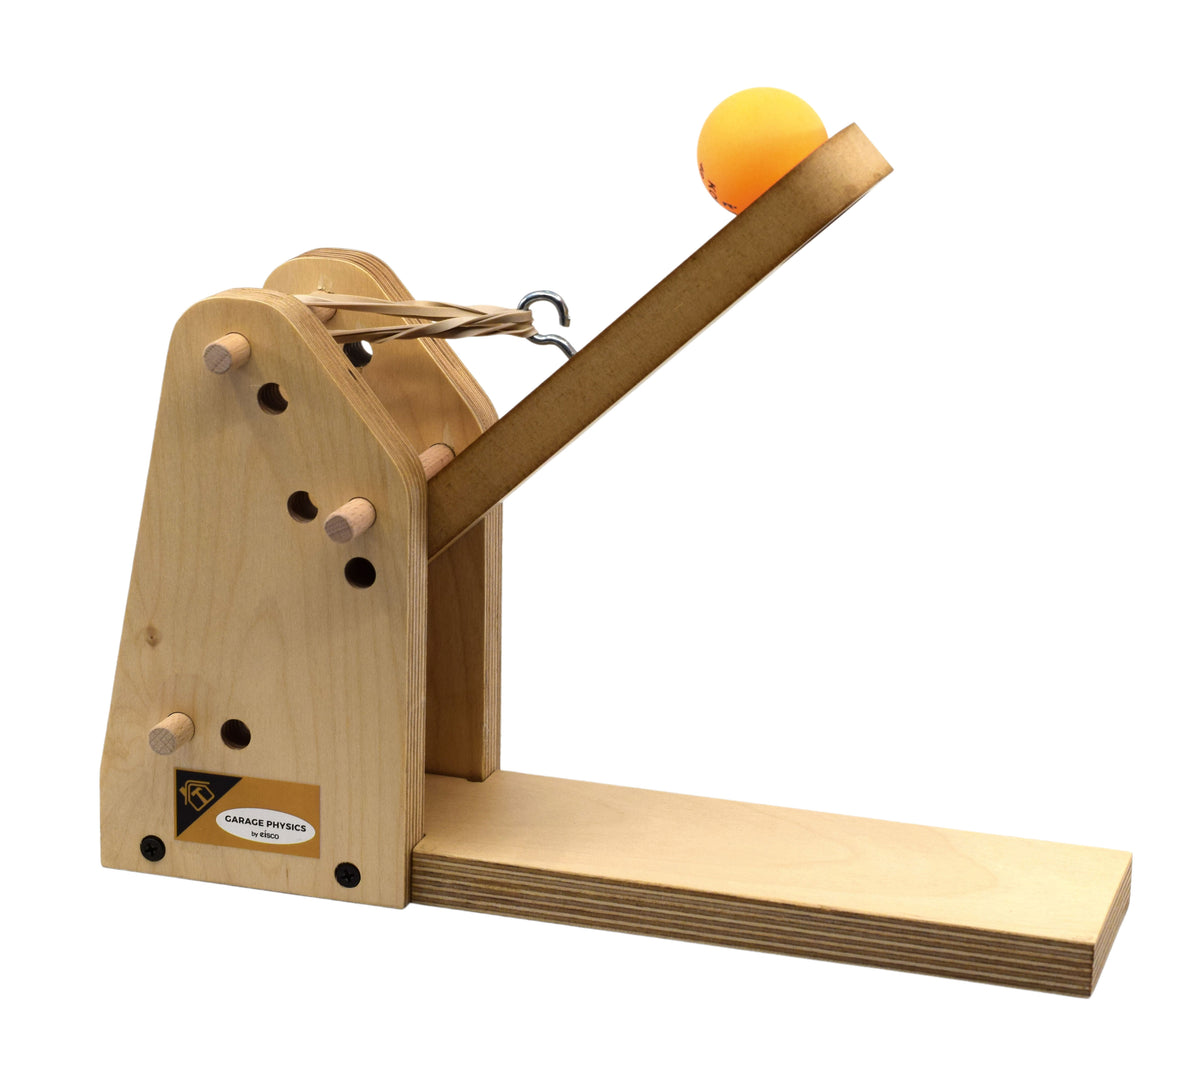 Build Your Own Catapult Kit - STEM Learning - Garage Physics by 